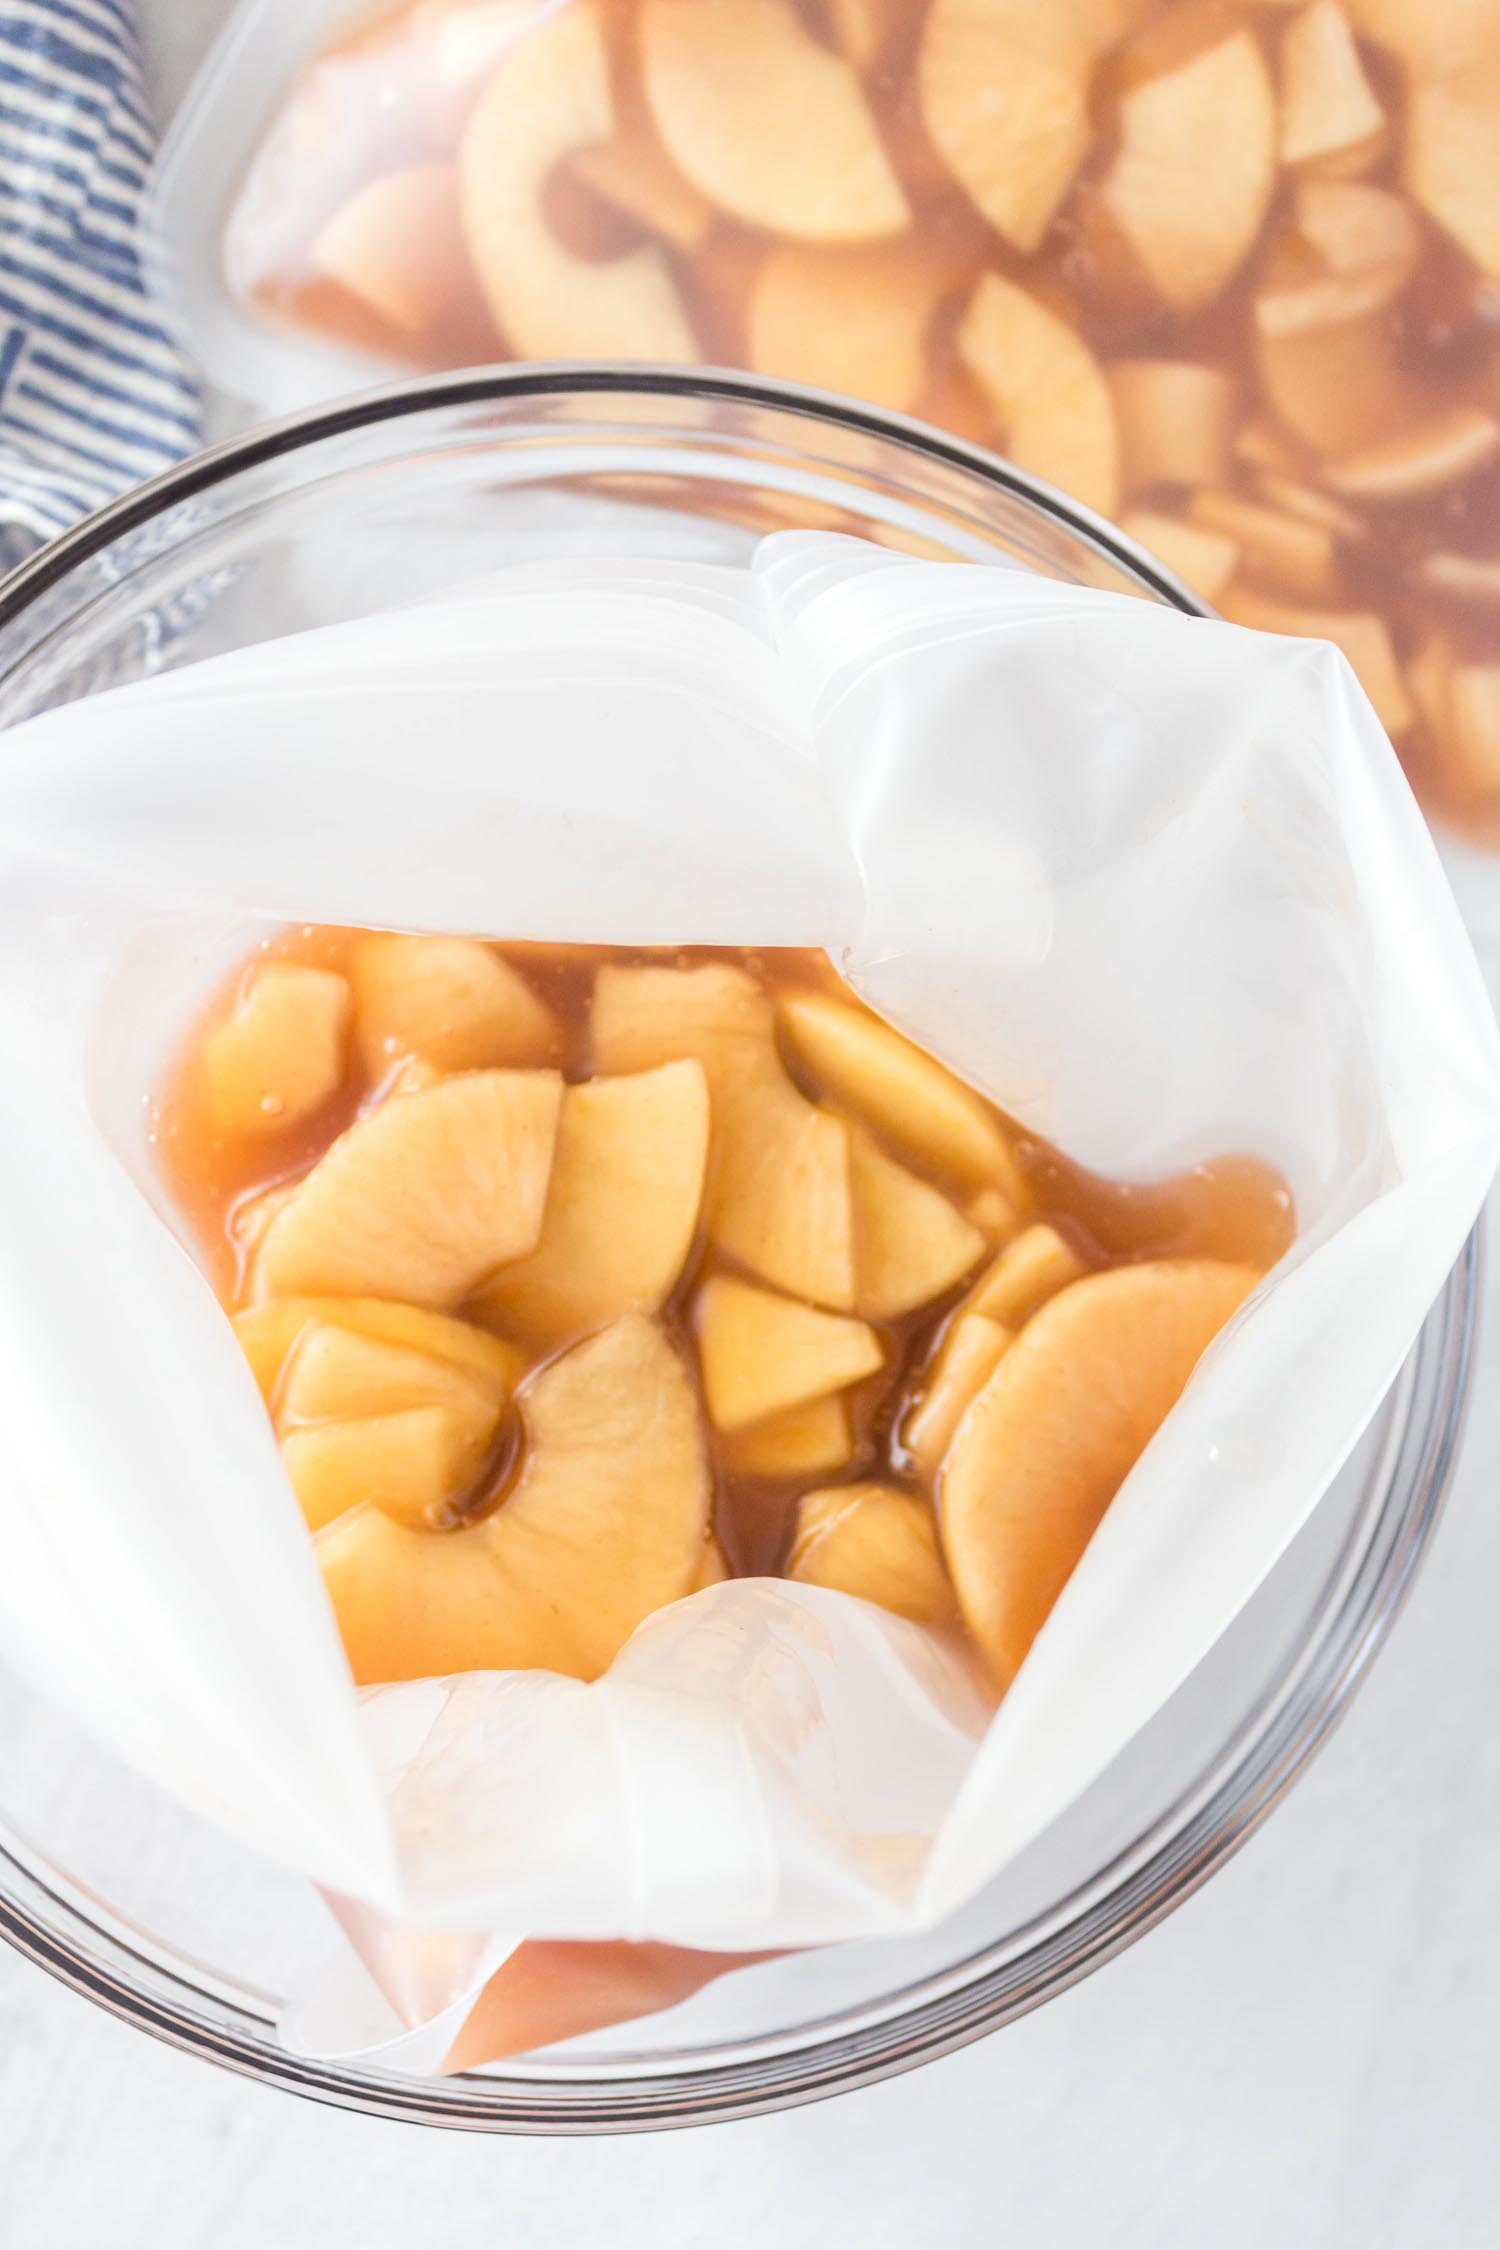 A resealable freezer bag with make ahead apple pie filling in a glass bowl with other filled bags on the side.